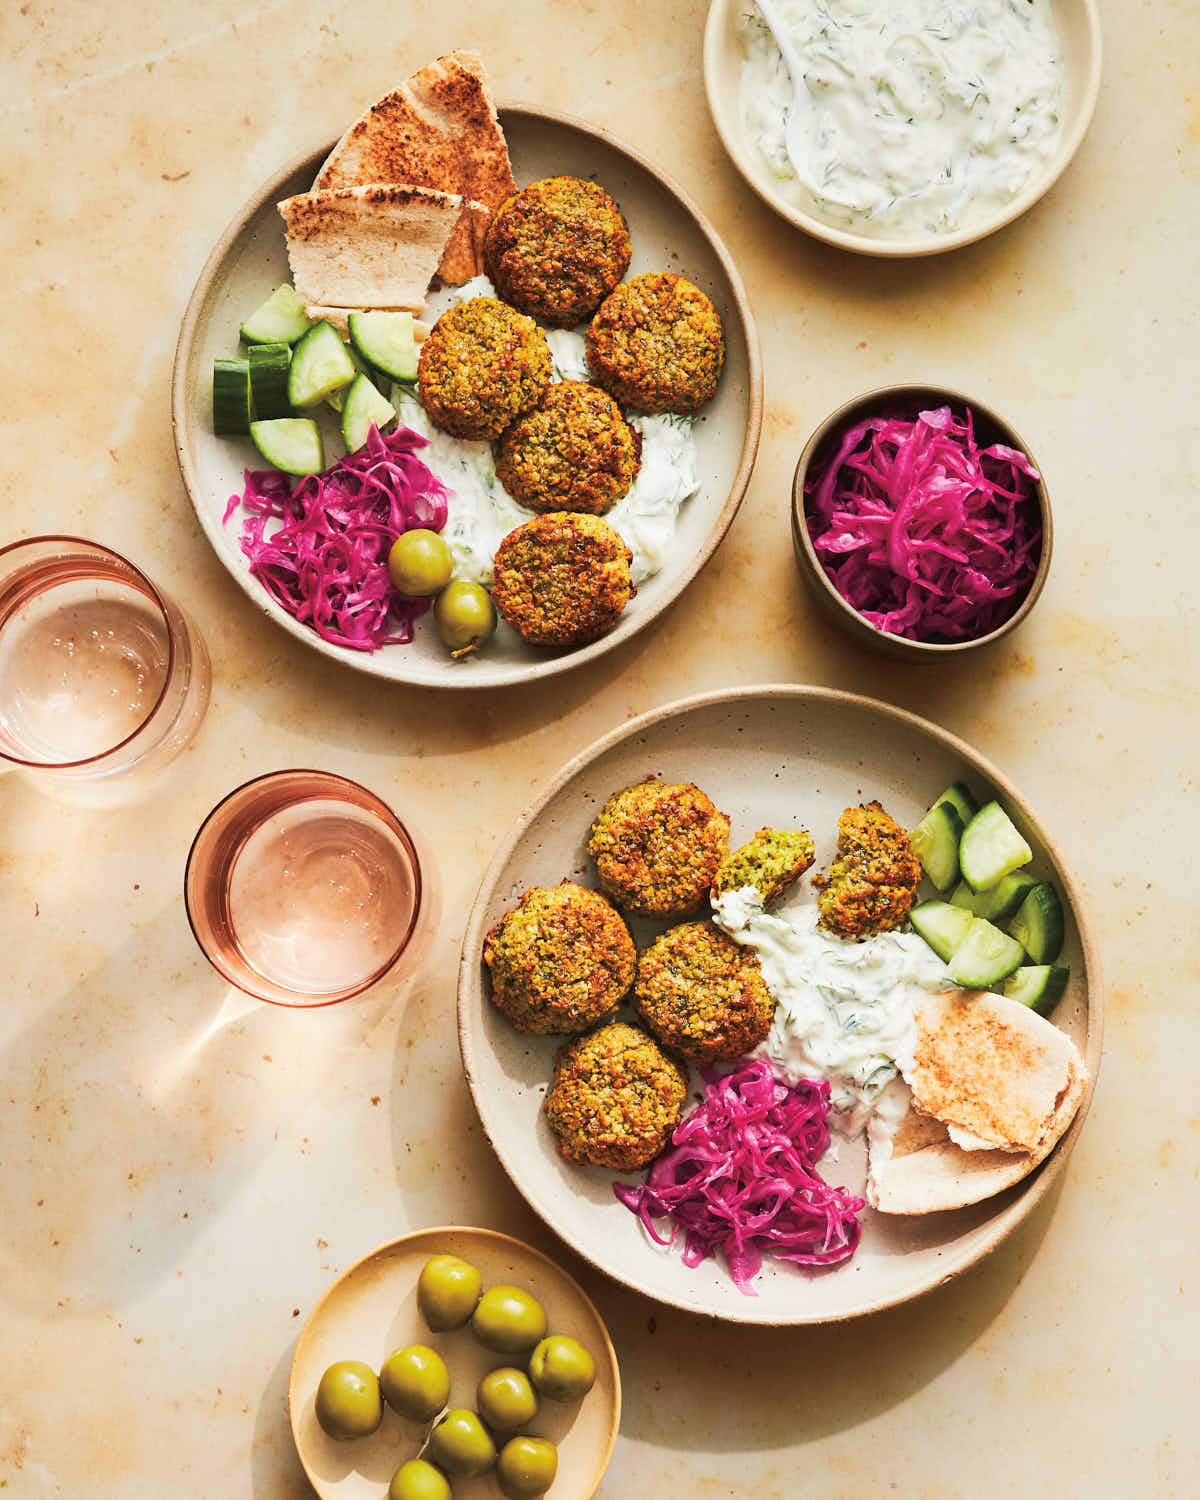 Baked Falafel Bowls from the Evergreen Kitchen cookbook